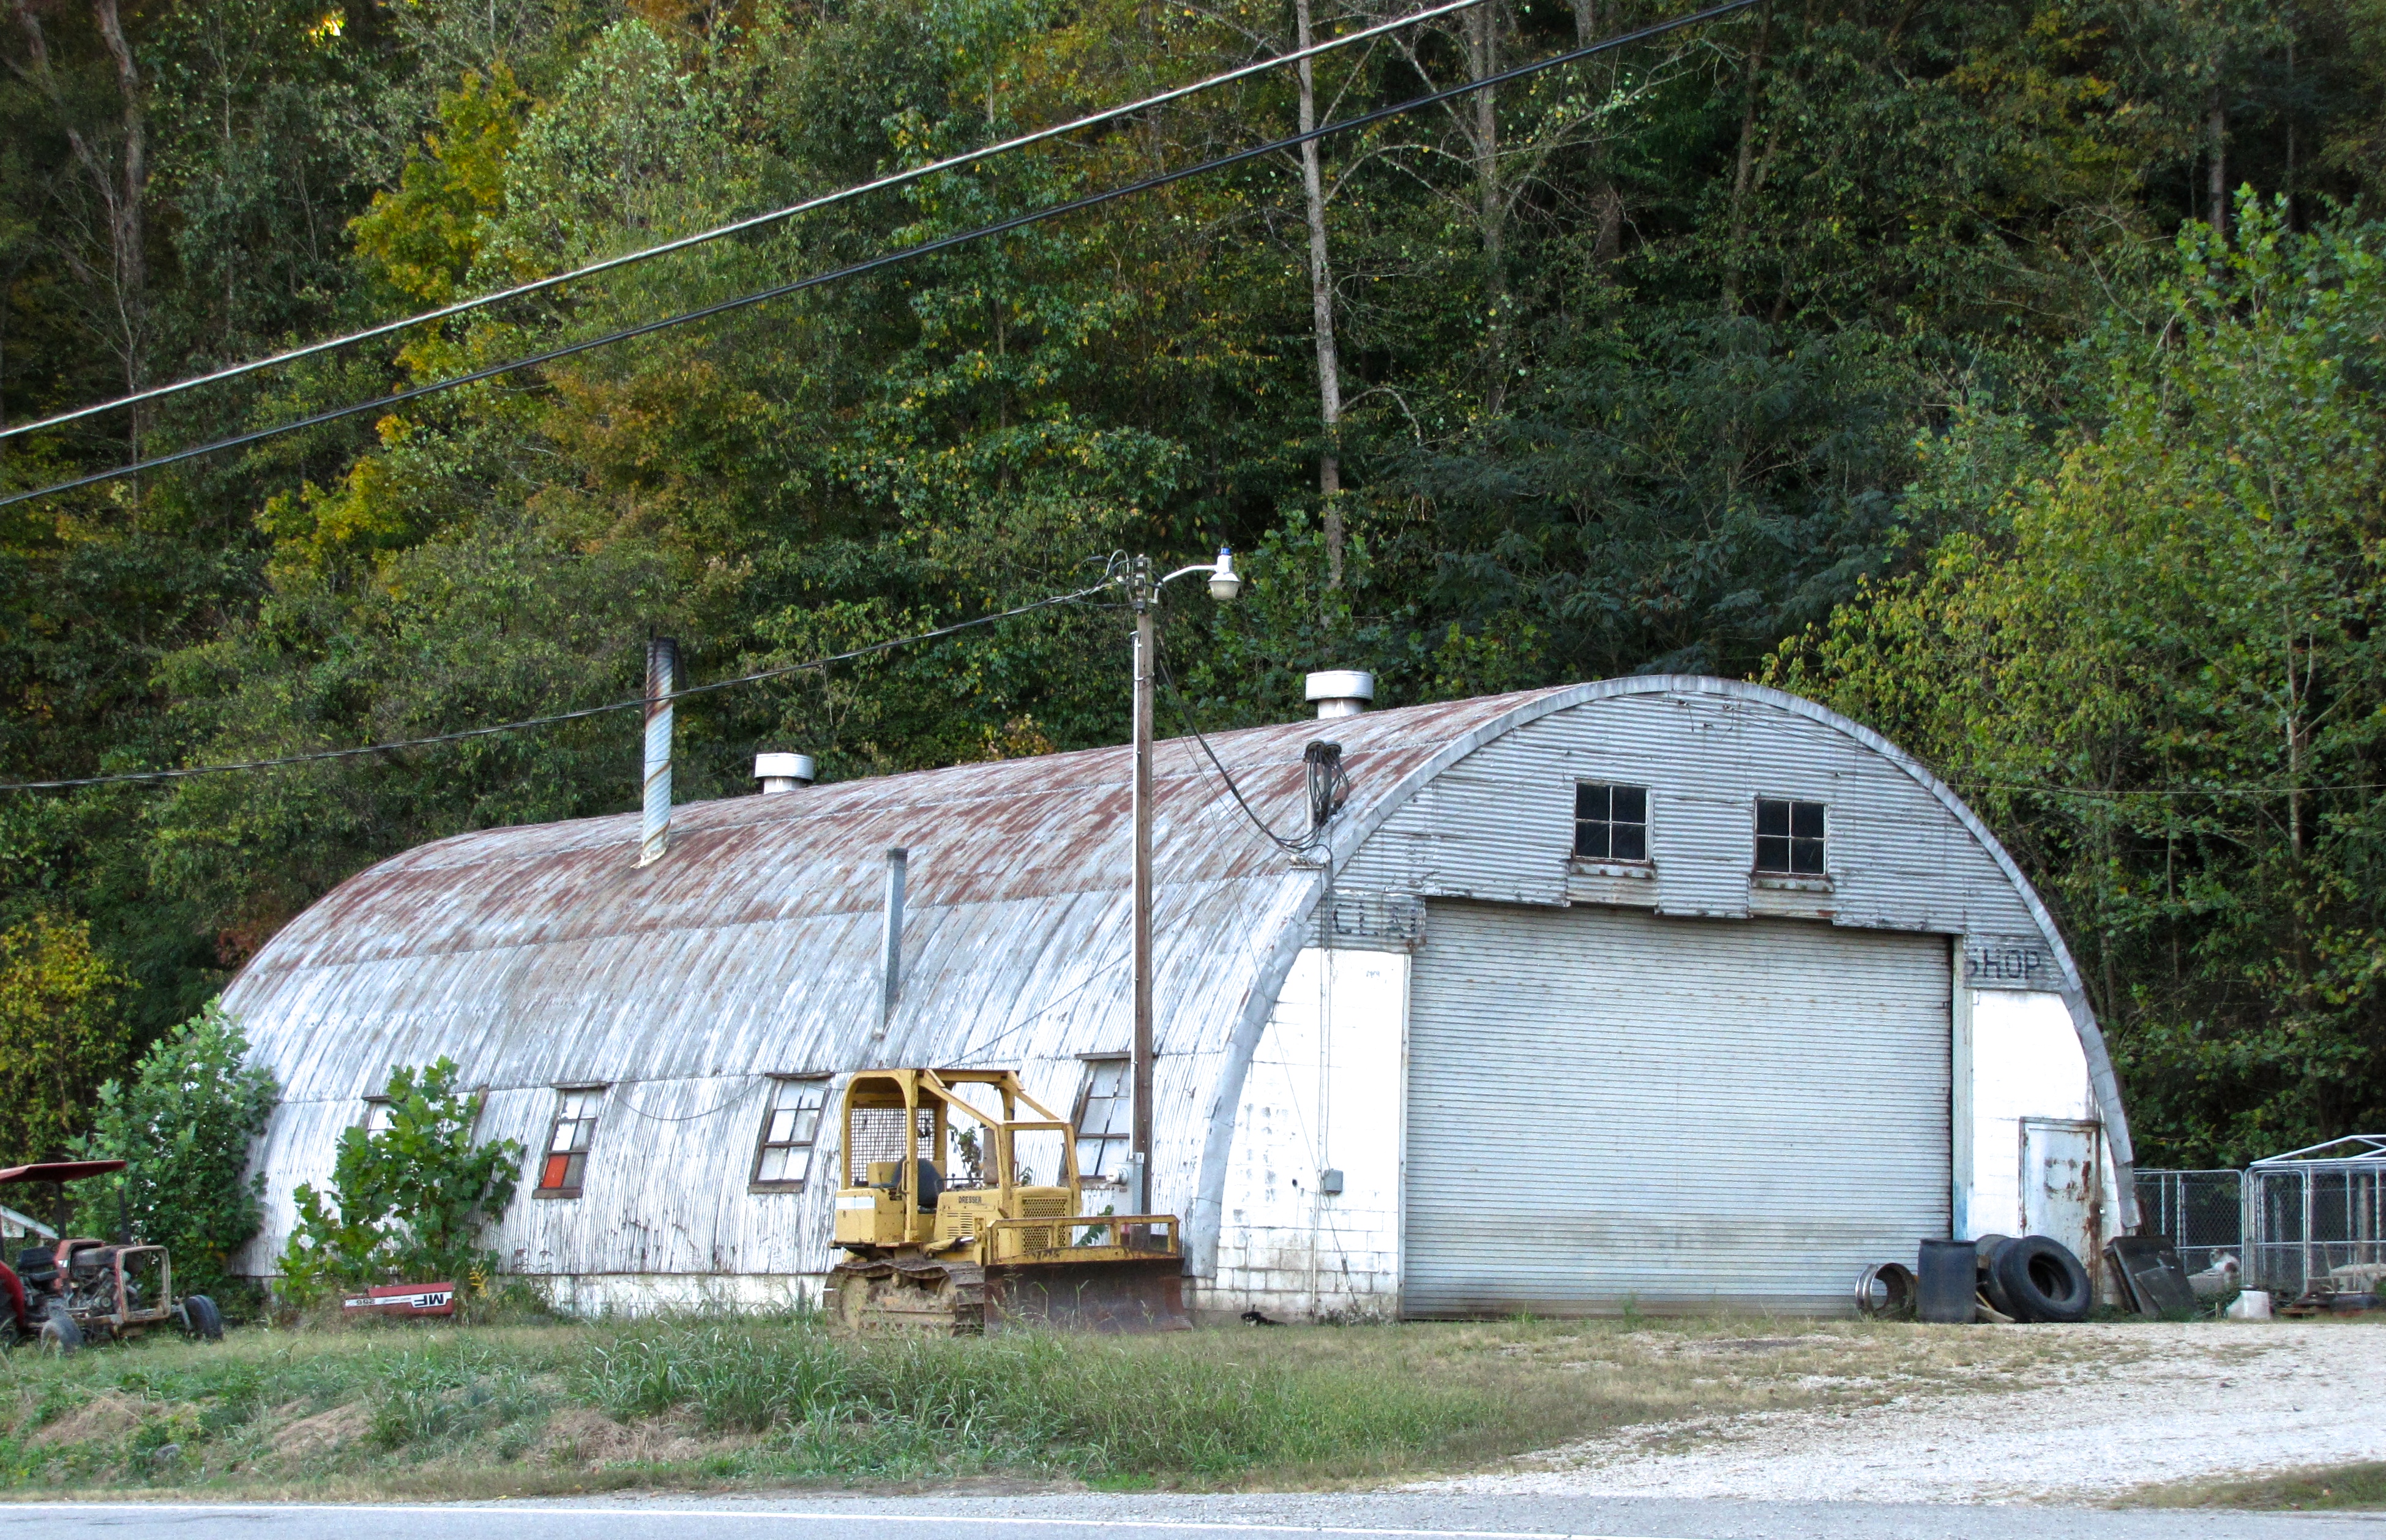 quonset hut in Oak Grove, KY